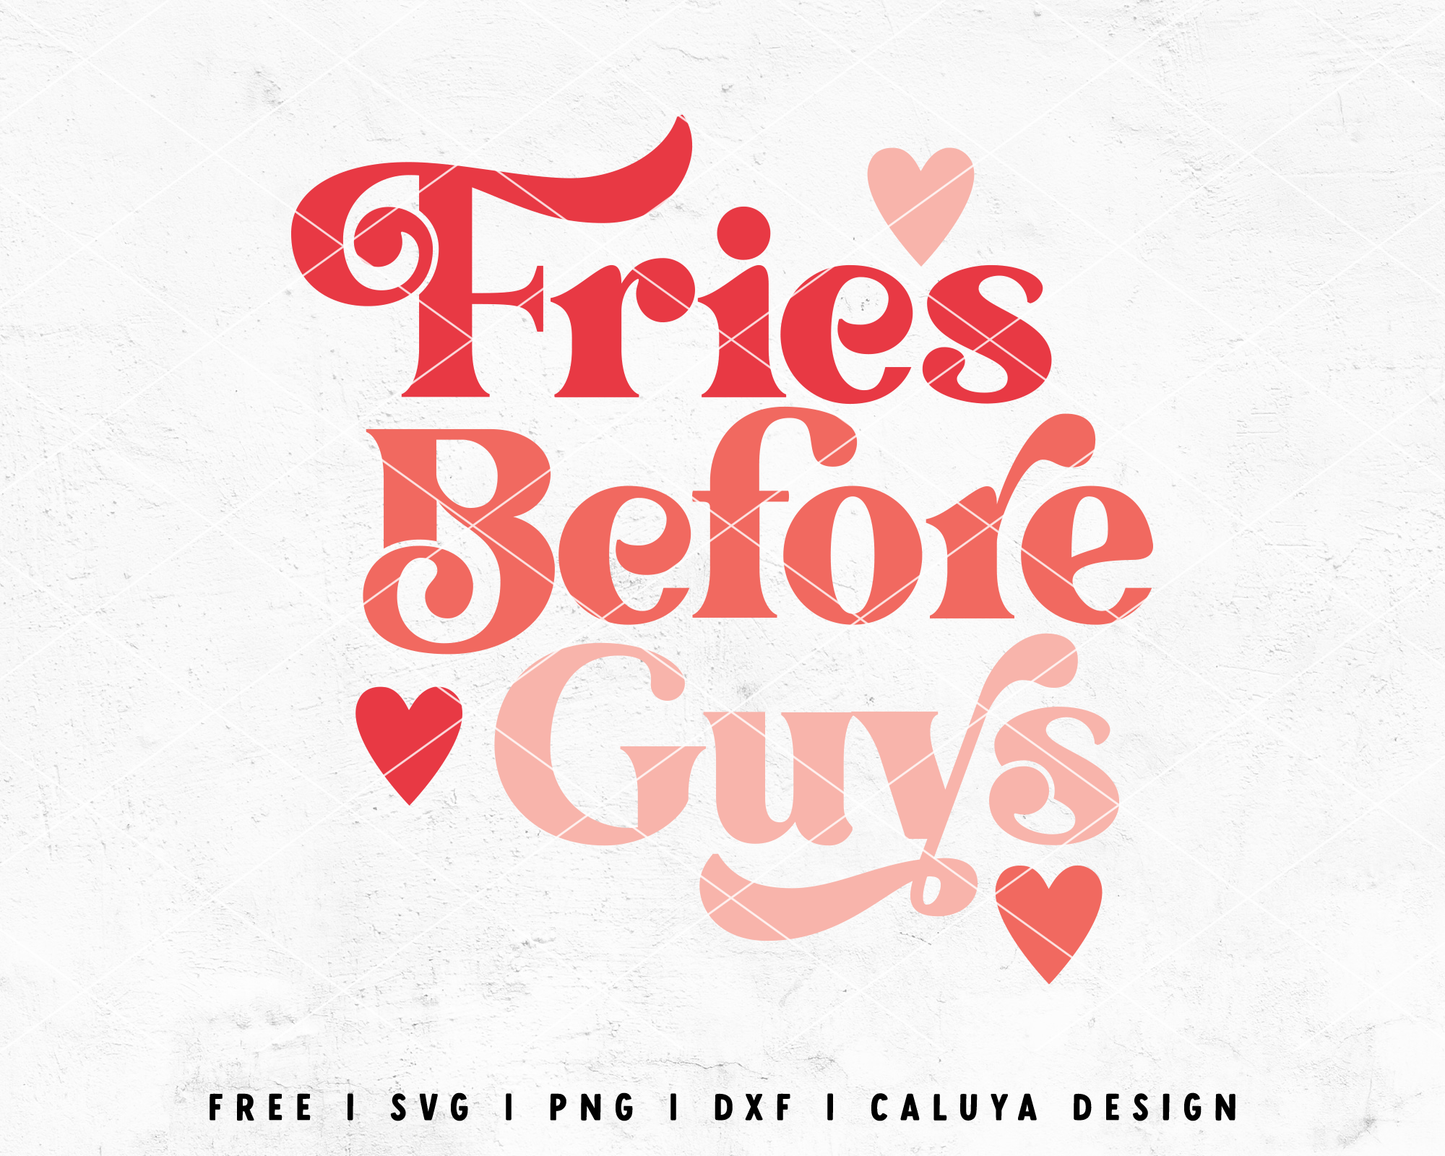 FREE FREE Fries Before Guys SVG | Anti Valentine SVG SVG Cut File for Cricut, Cameo Silhouette | Free SVG Cut File